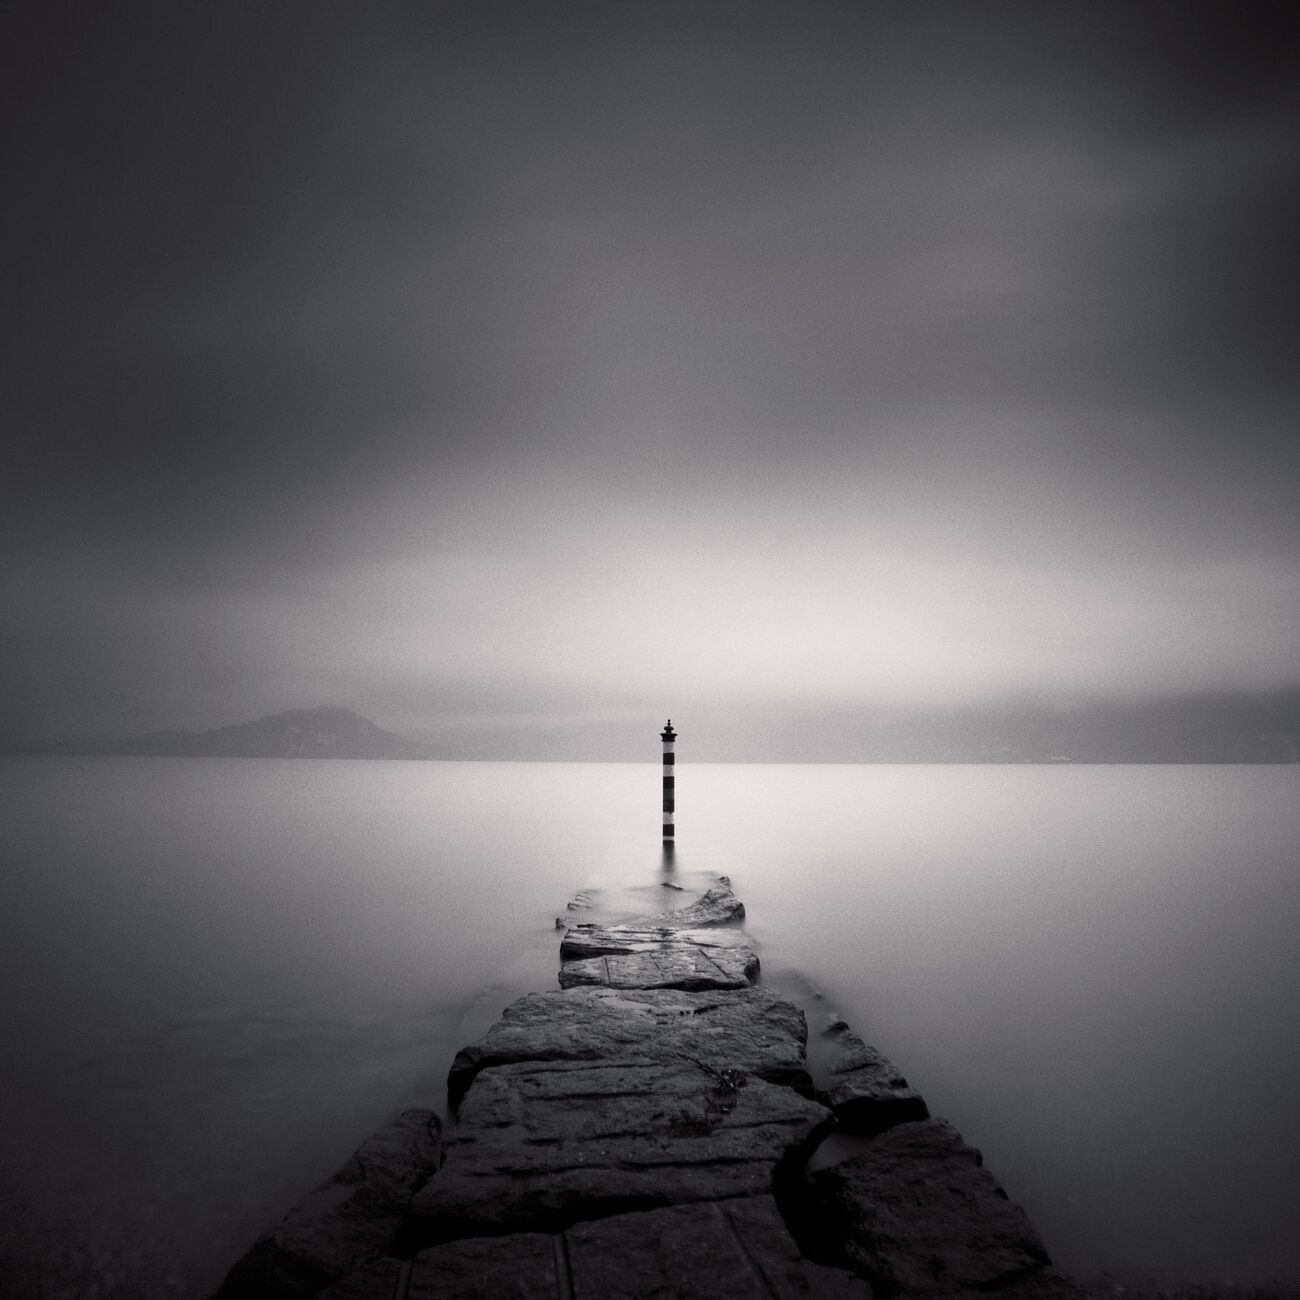 Striped Pole, Etude 1, Lake Maggiore, Suisse. Août 2014. Ref-11441 - Denis Olivier Photographie